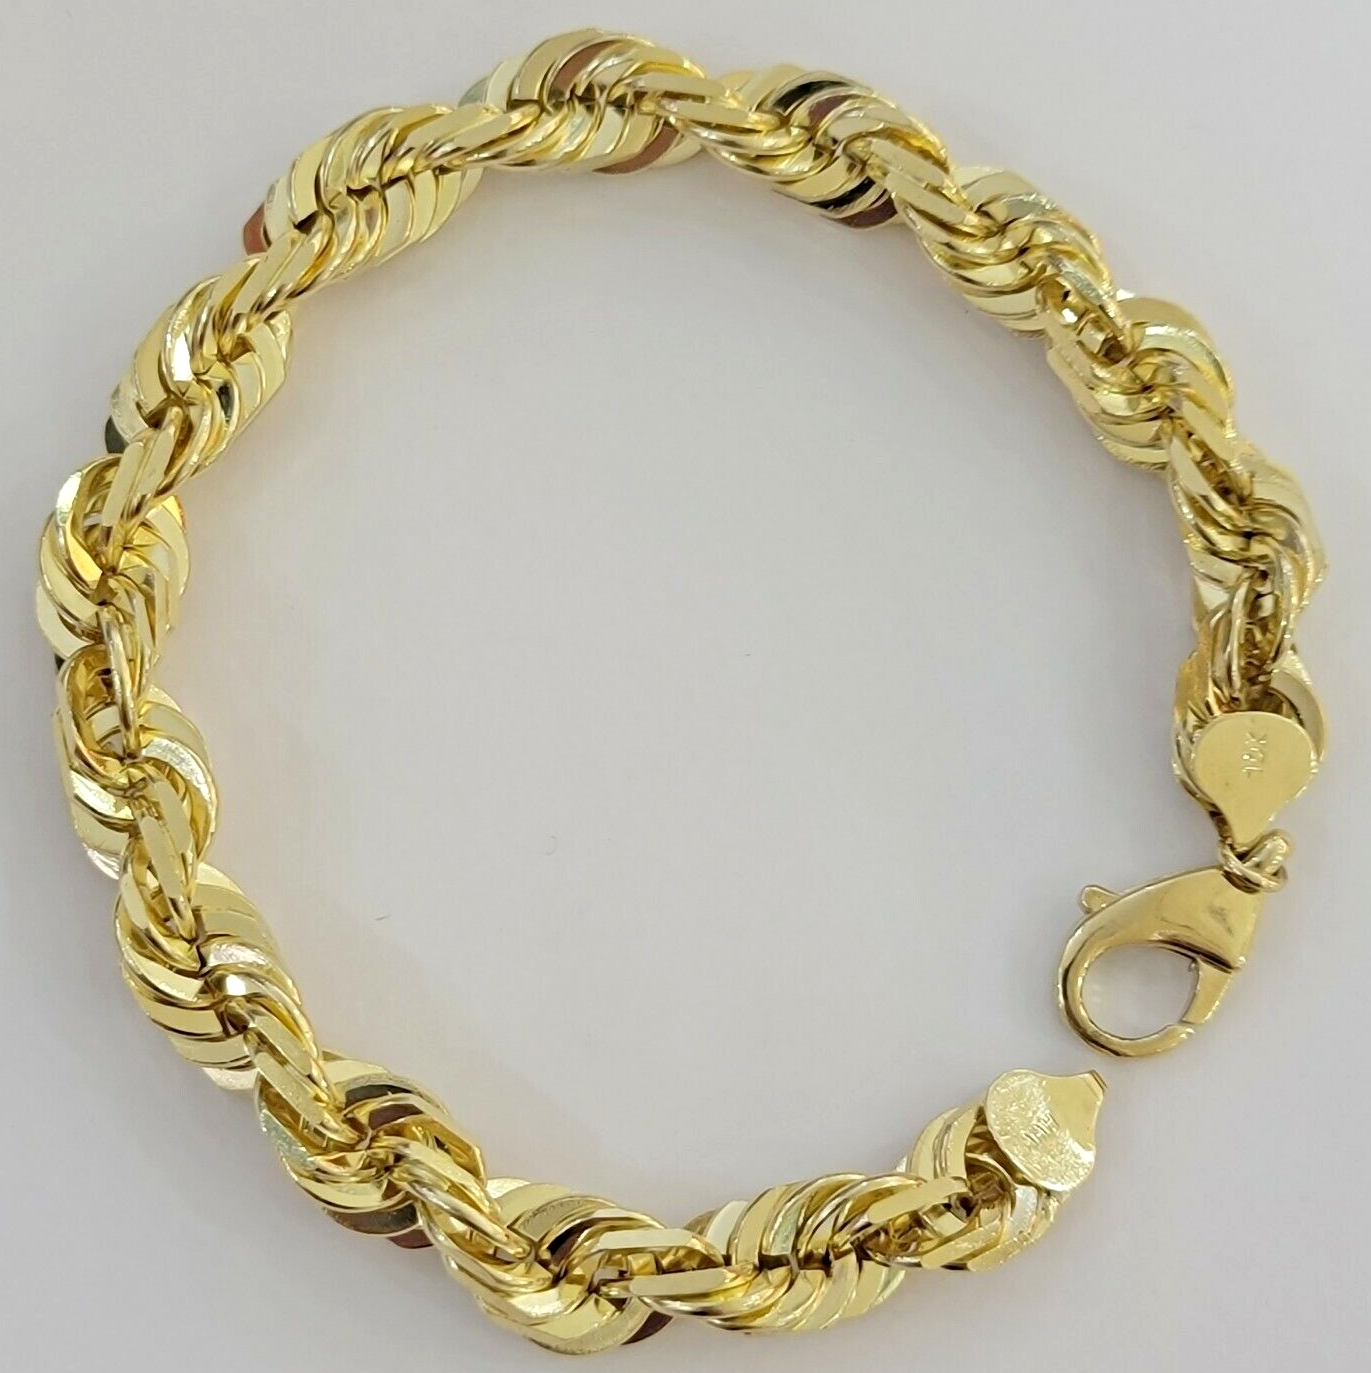 10k Gold Rope Bracelet 9 Inch 10mm Diamond Cuts Real Solid Link 10KT Yellow Gold